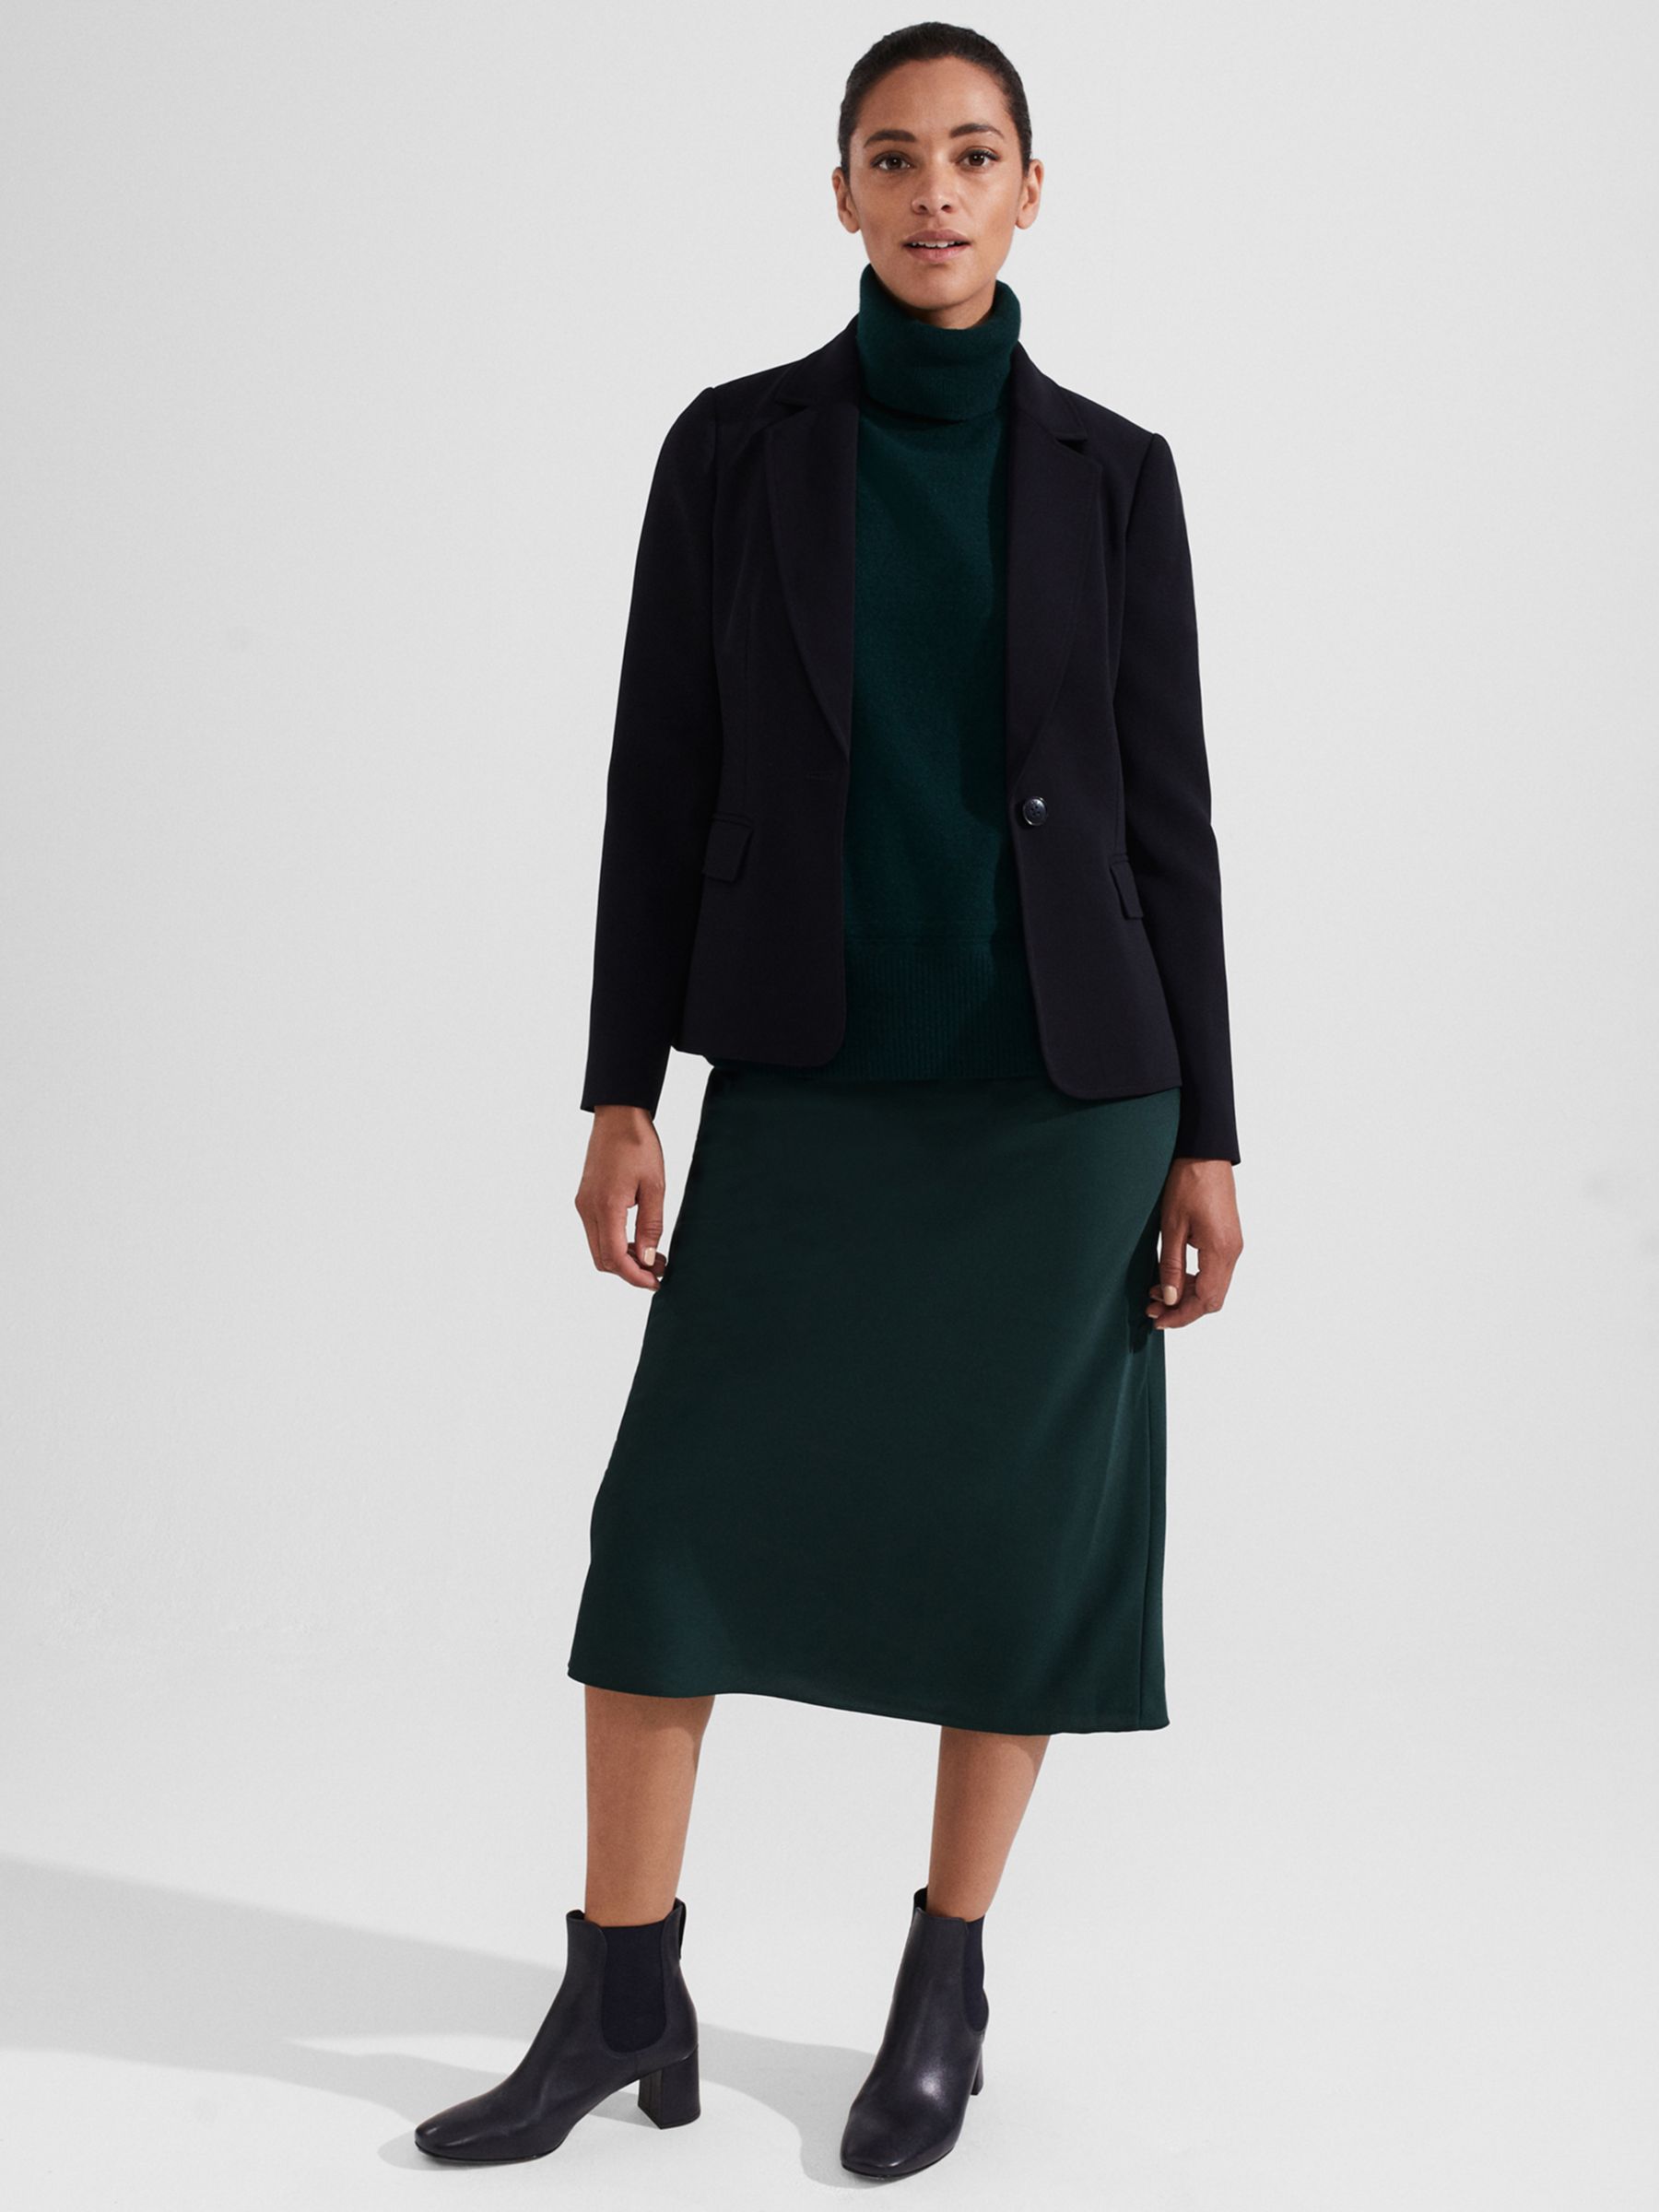 Hobbs Imogen Leather Chelsea Boots, Navy at John Lewis & Partners